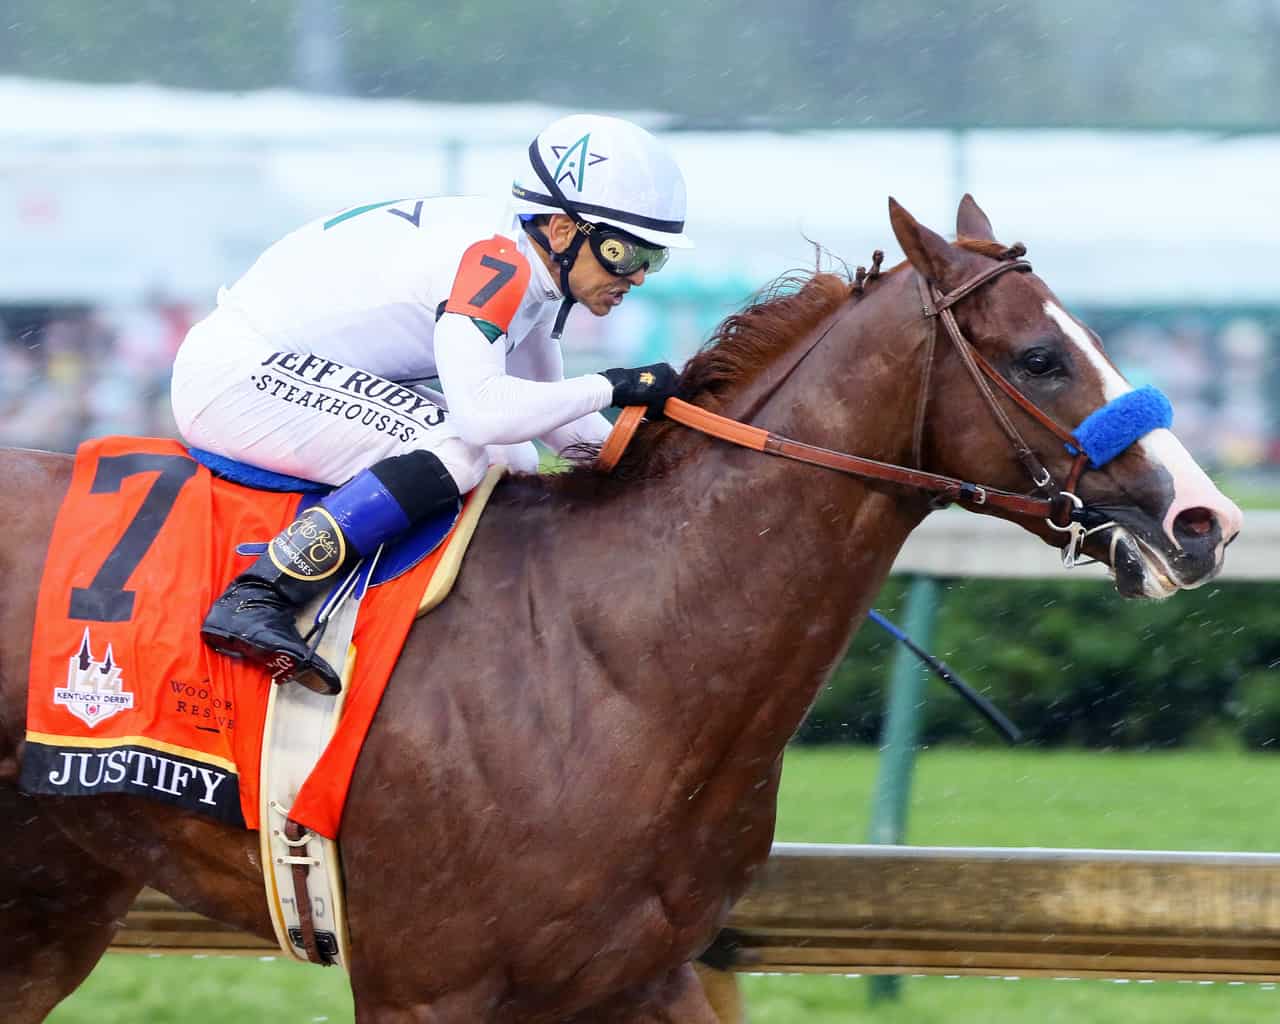 Why Justify Won the Kentucky Derby